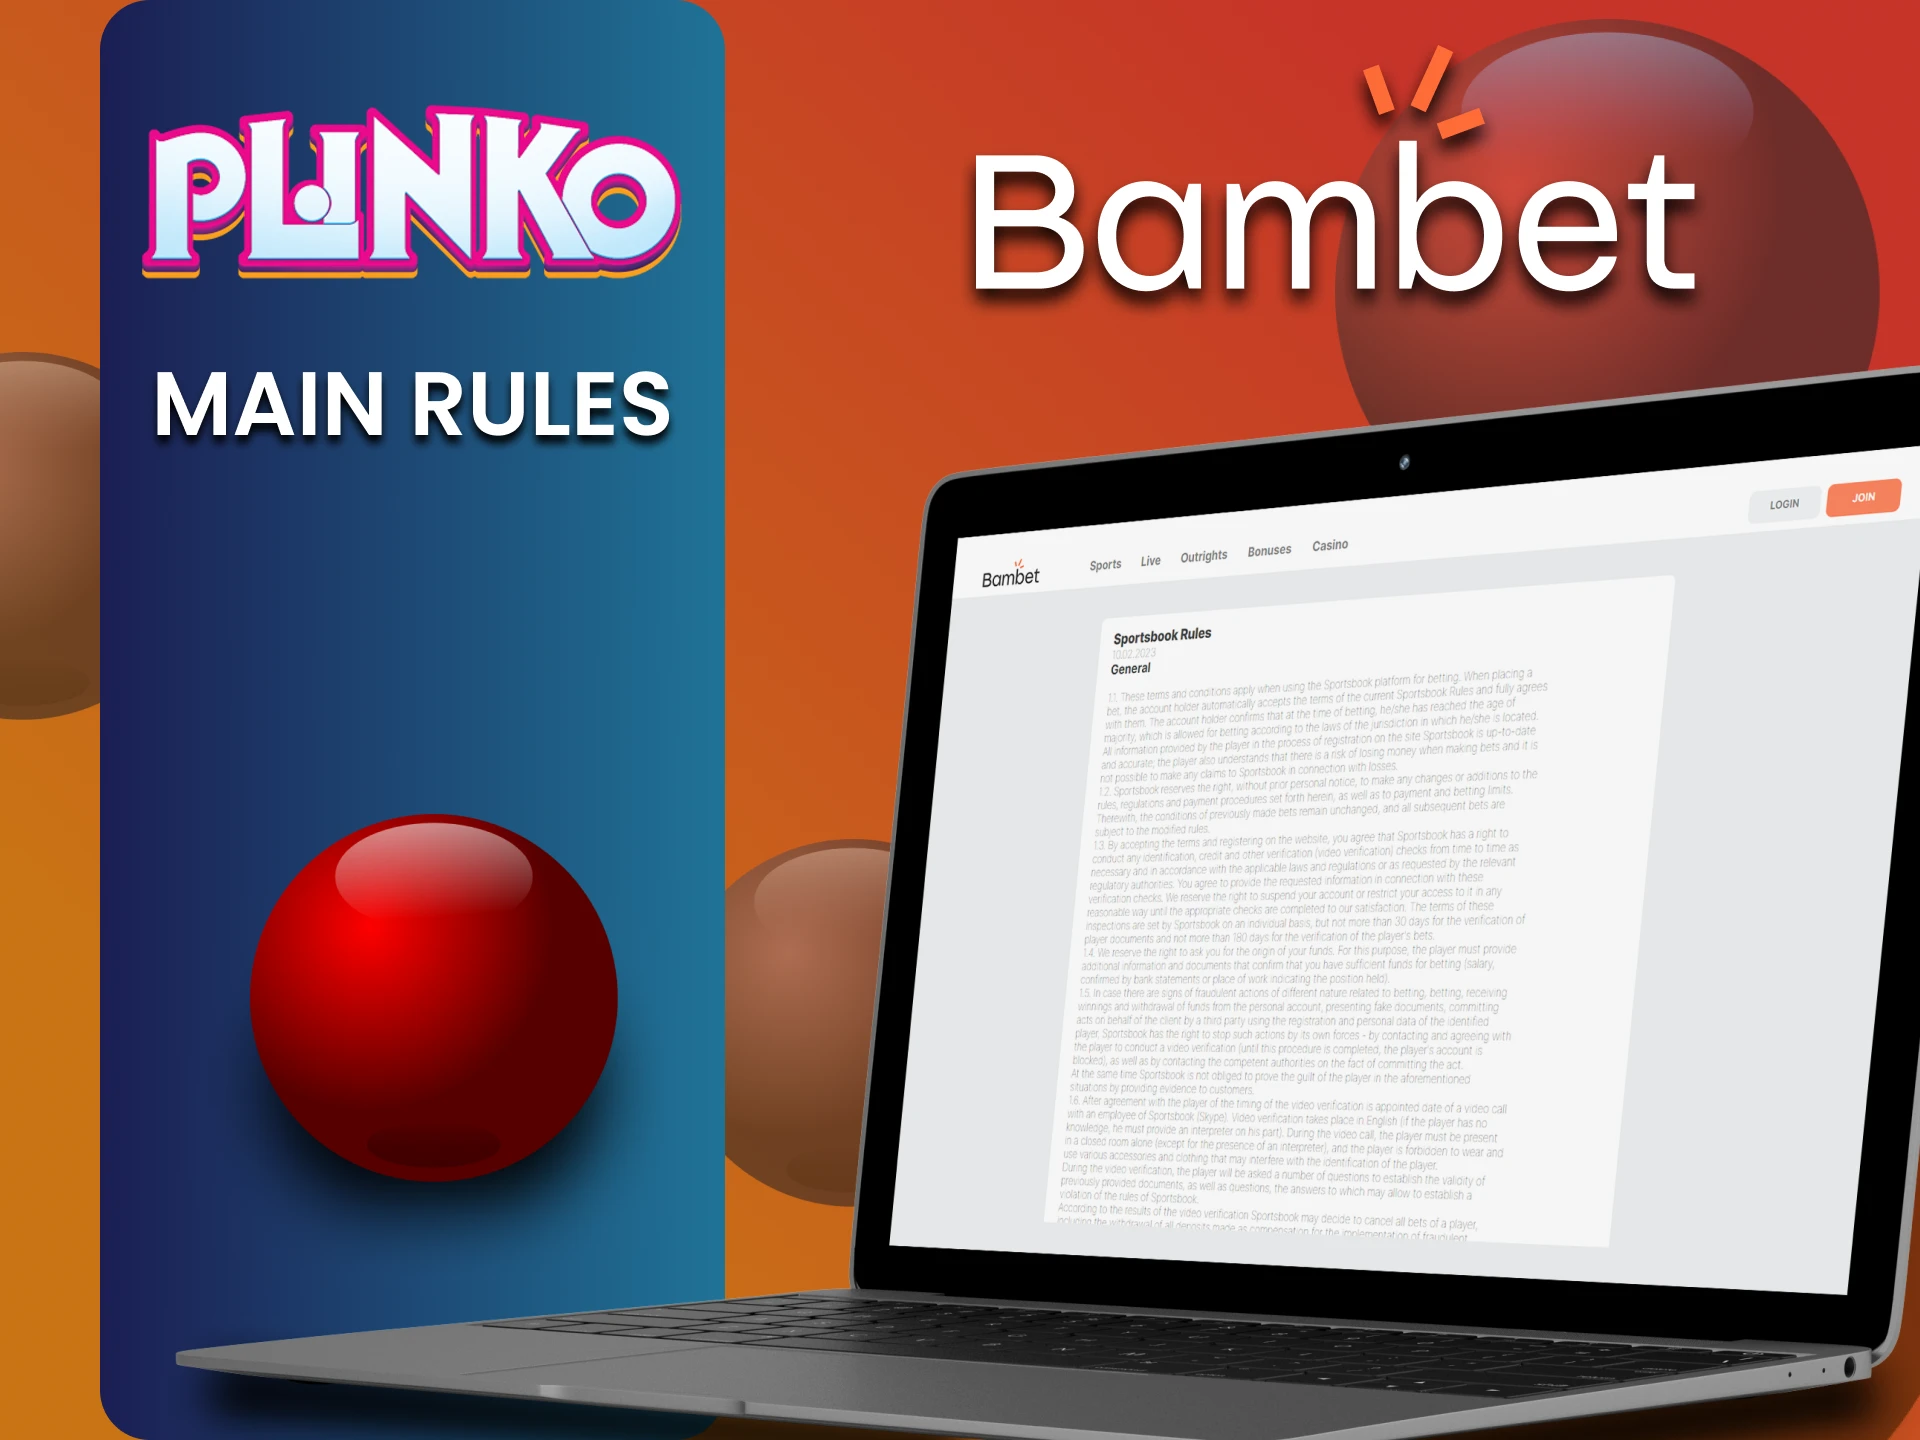 You need to know the rules of the Bambet website to play Plinko.